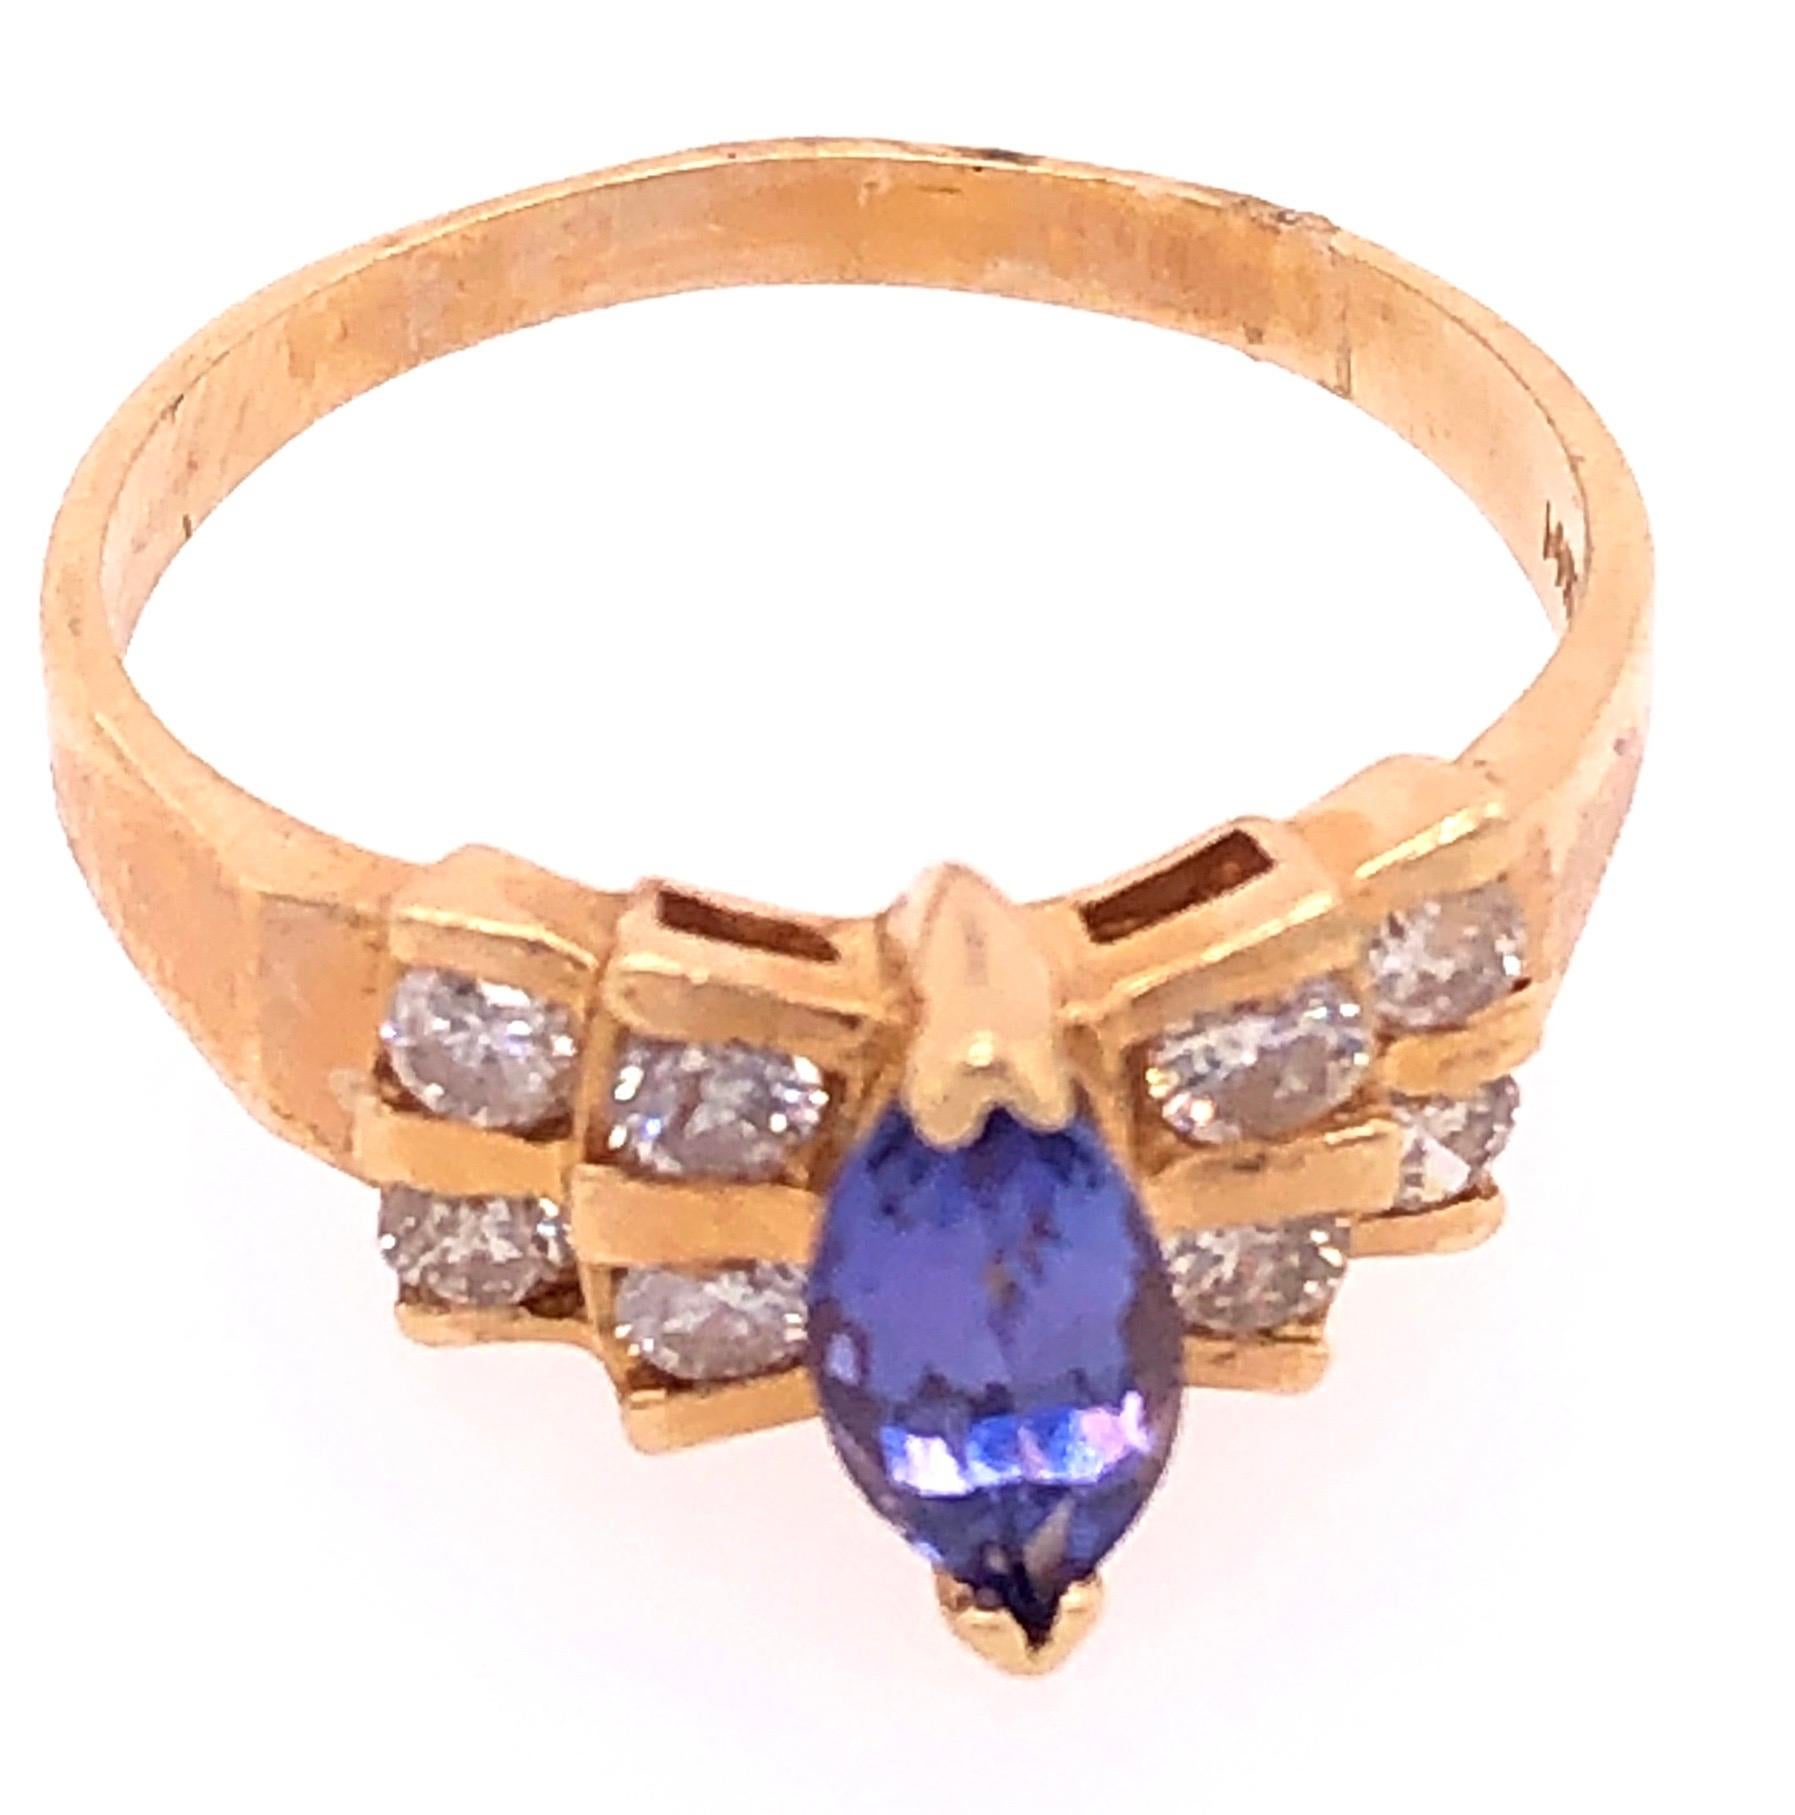 14 Karat Yellow Gold Contemporary Ring with Turquoise and Diamonds  0.56 TDW.
Size 7 
3 grams total weight.